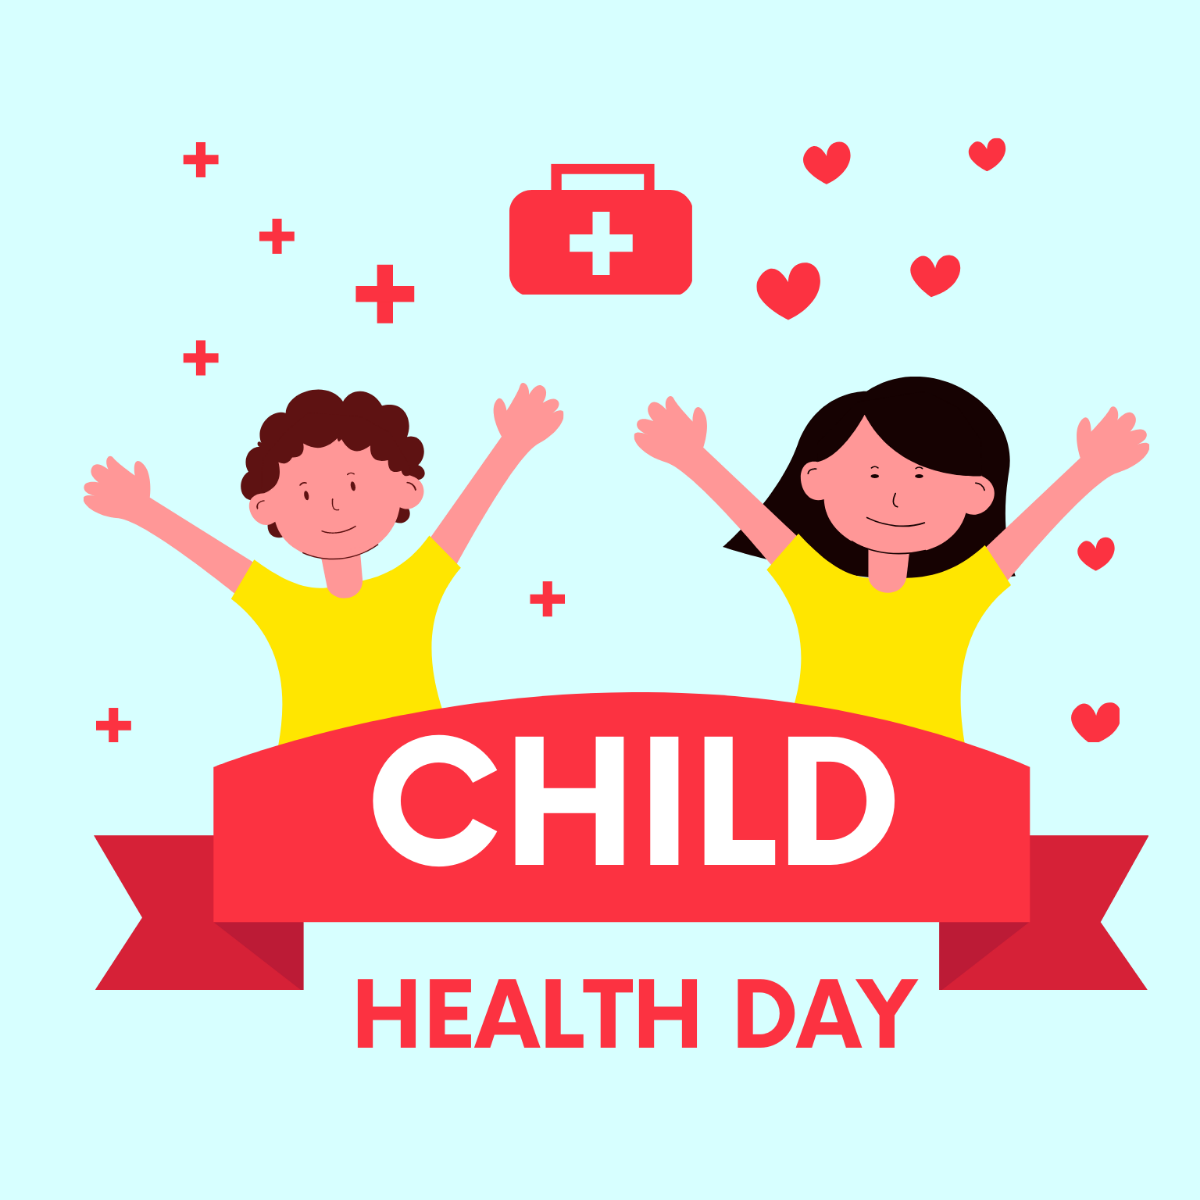 Free Child Health Day Illustration Template